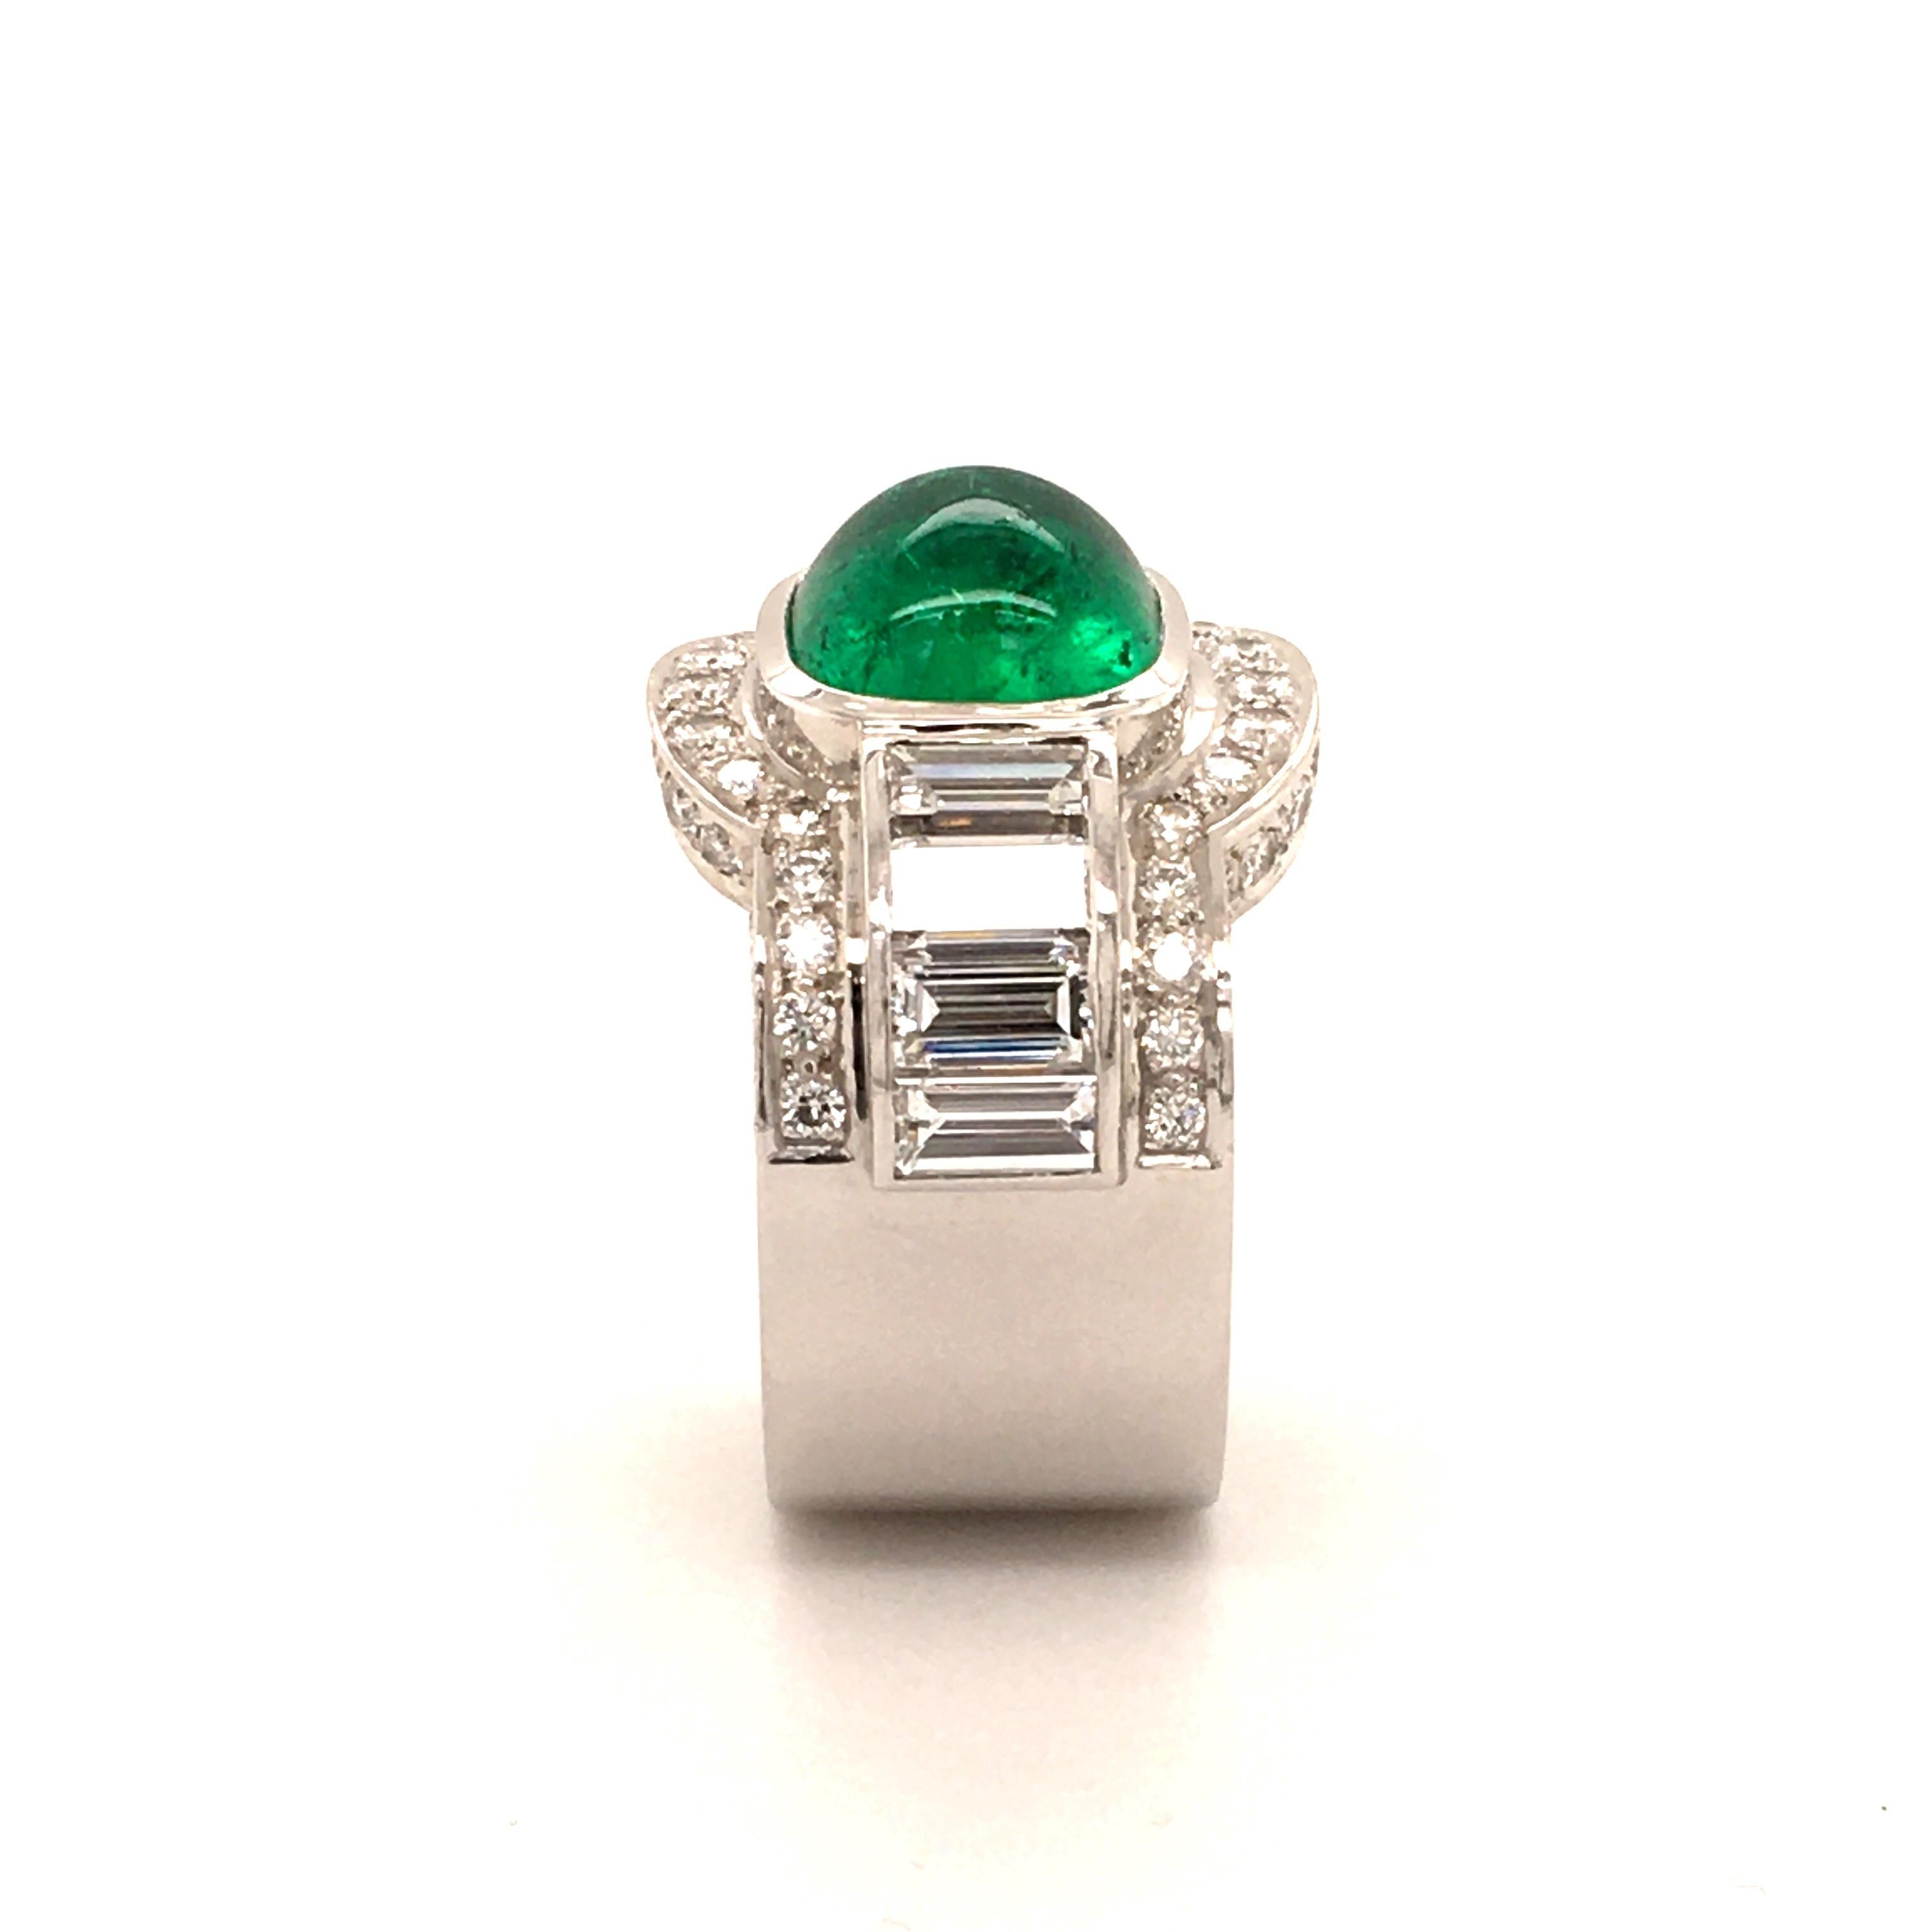 4.50 Carat Emerald and Diamond Ring in 18 Karat White Gold For Sale 2